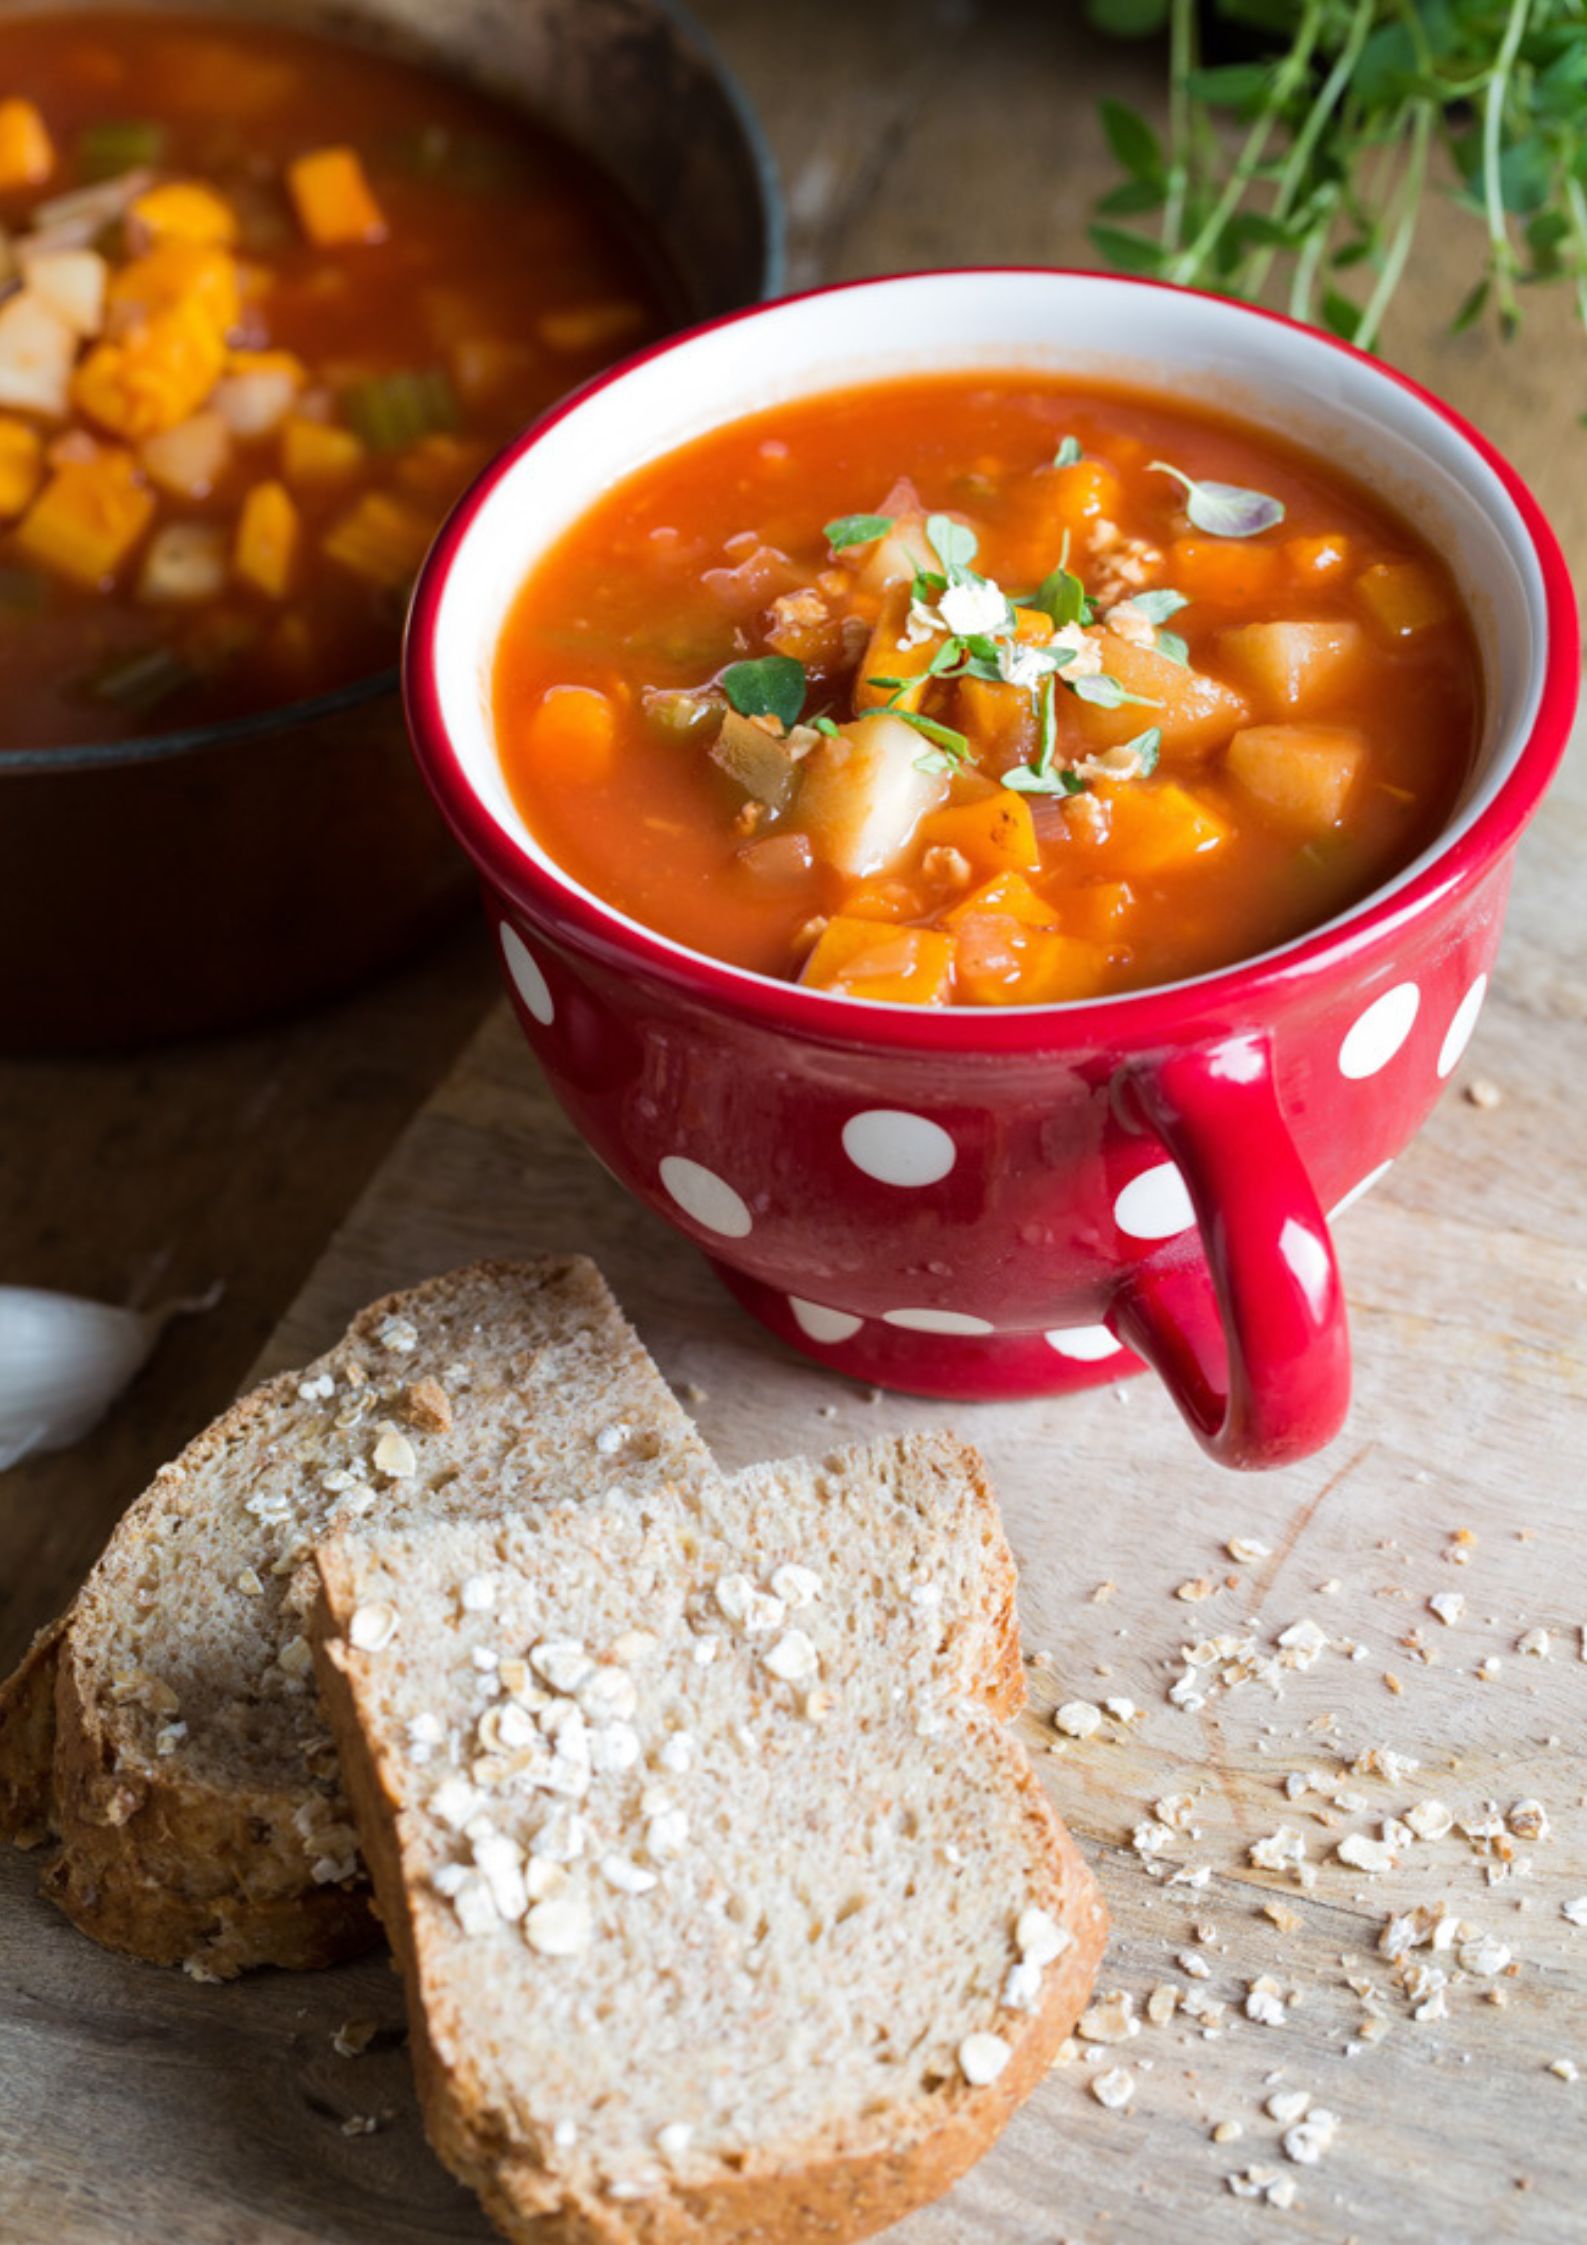 Made with store cupboard staples and vegetable leftovers this hearty chunky vegetable soup is a warming, easy meal with a delicious combination of flavours. Recipe on thecookandhim.com | #vegetablesoup #veggiesoup #vegansoup #chunkysoup #autumnrecipes #winterrecipes